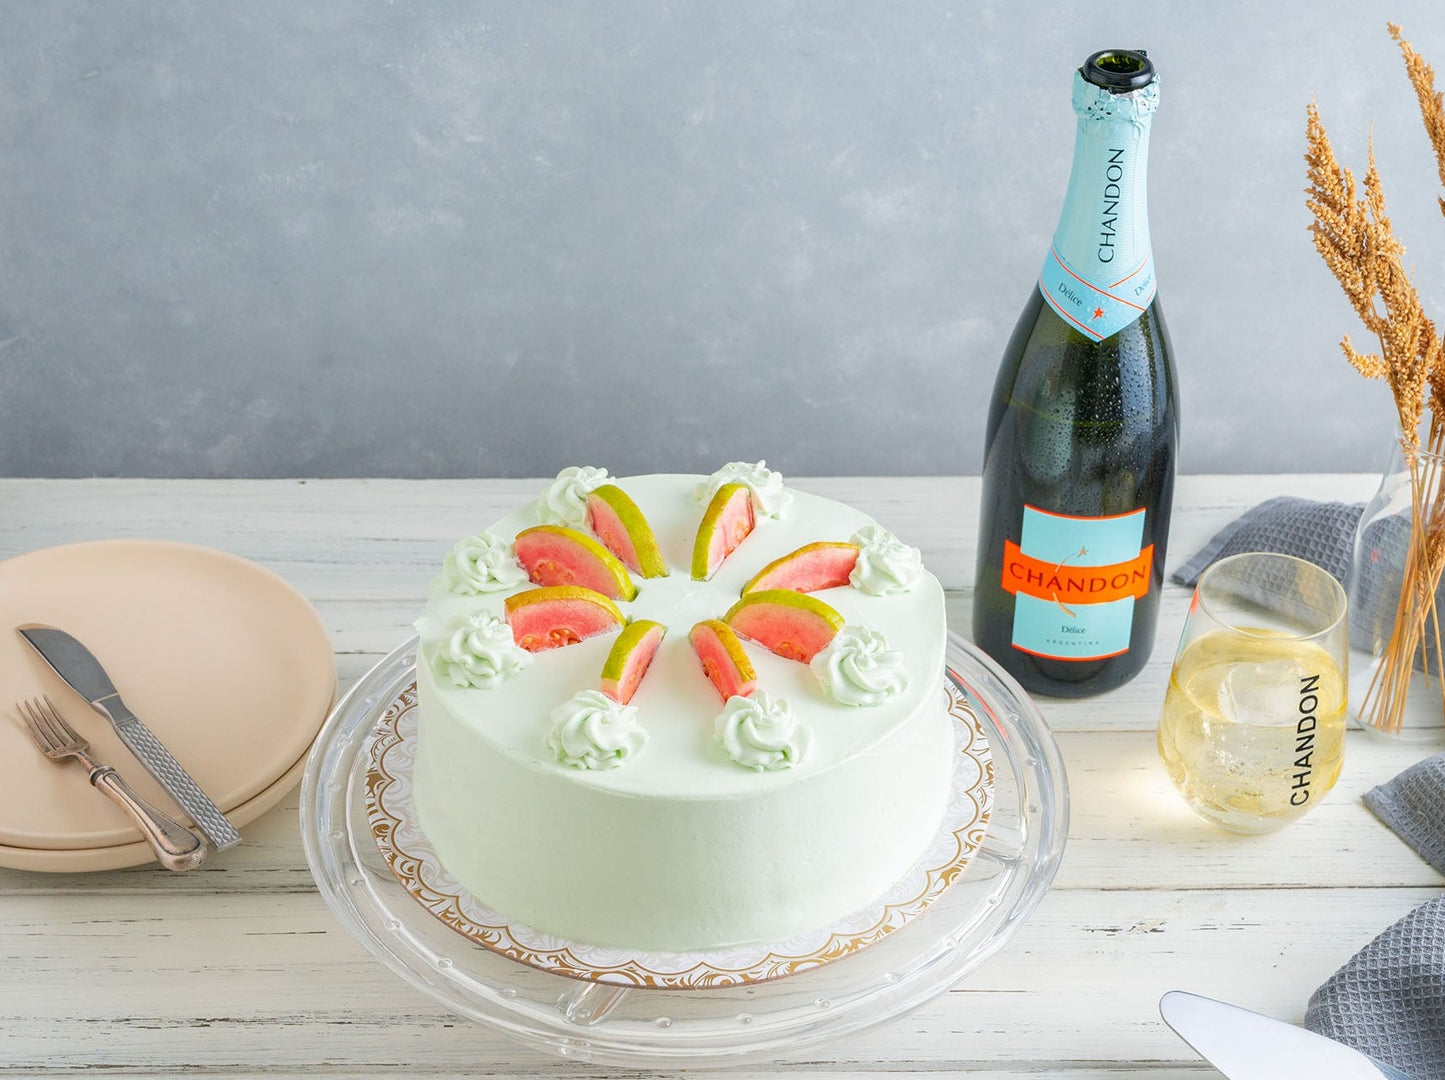 Helen's Guava Cake with a Bottle of Chandon - Delicé